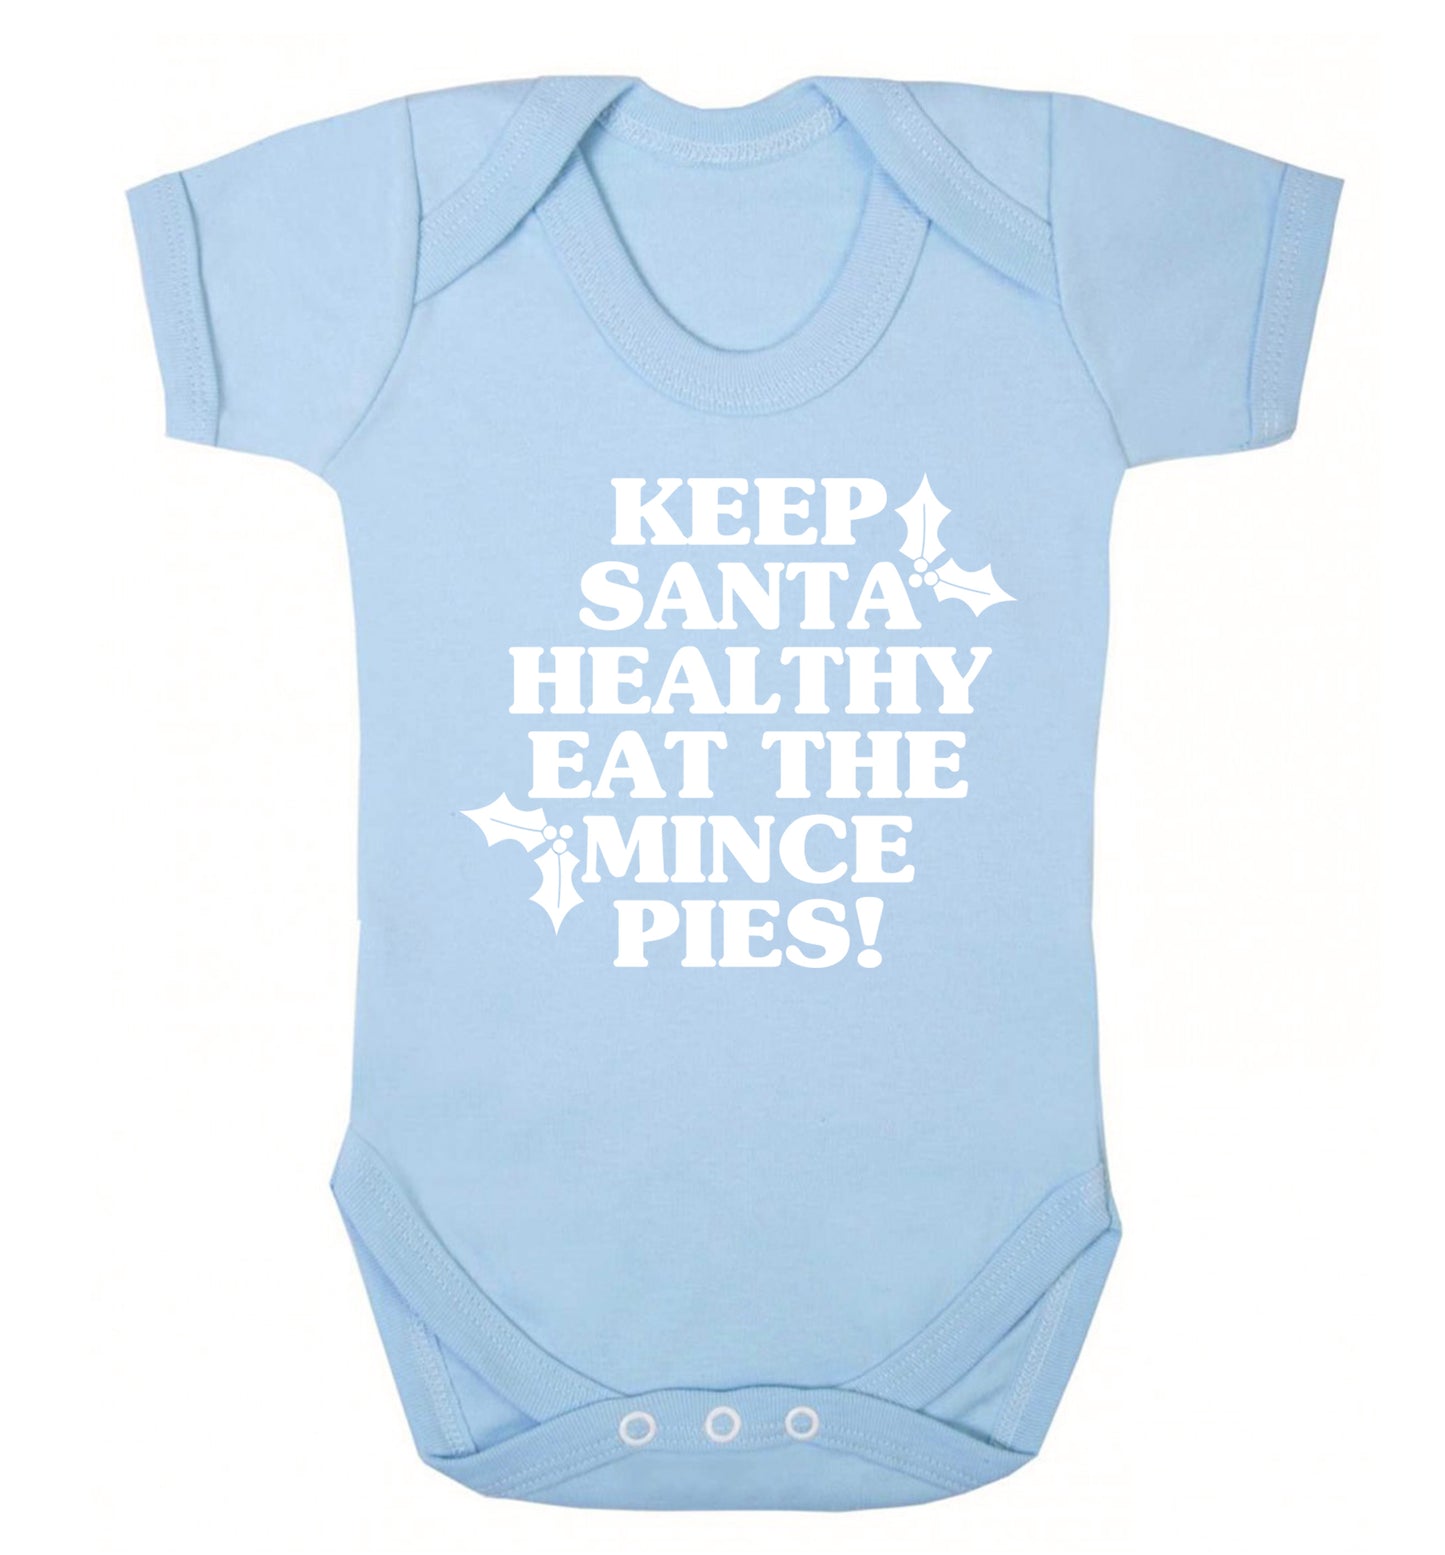 Keep santa healthy eat the mince pies Baby Vest pale blue 18-24 months